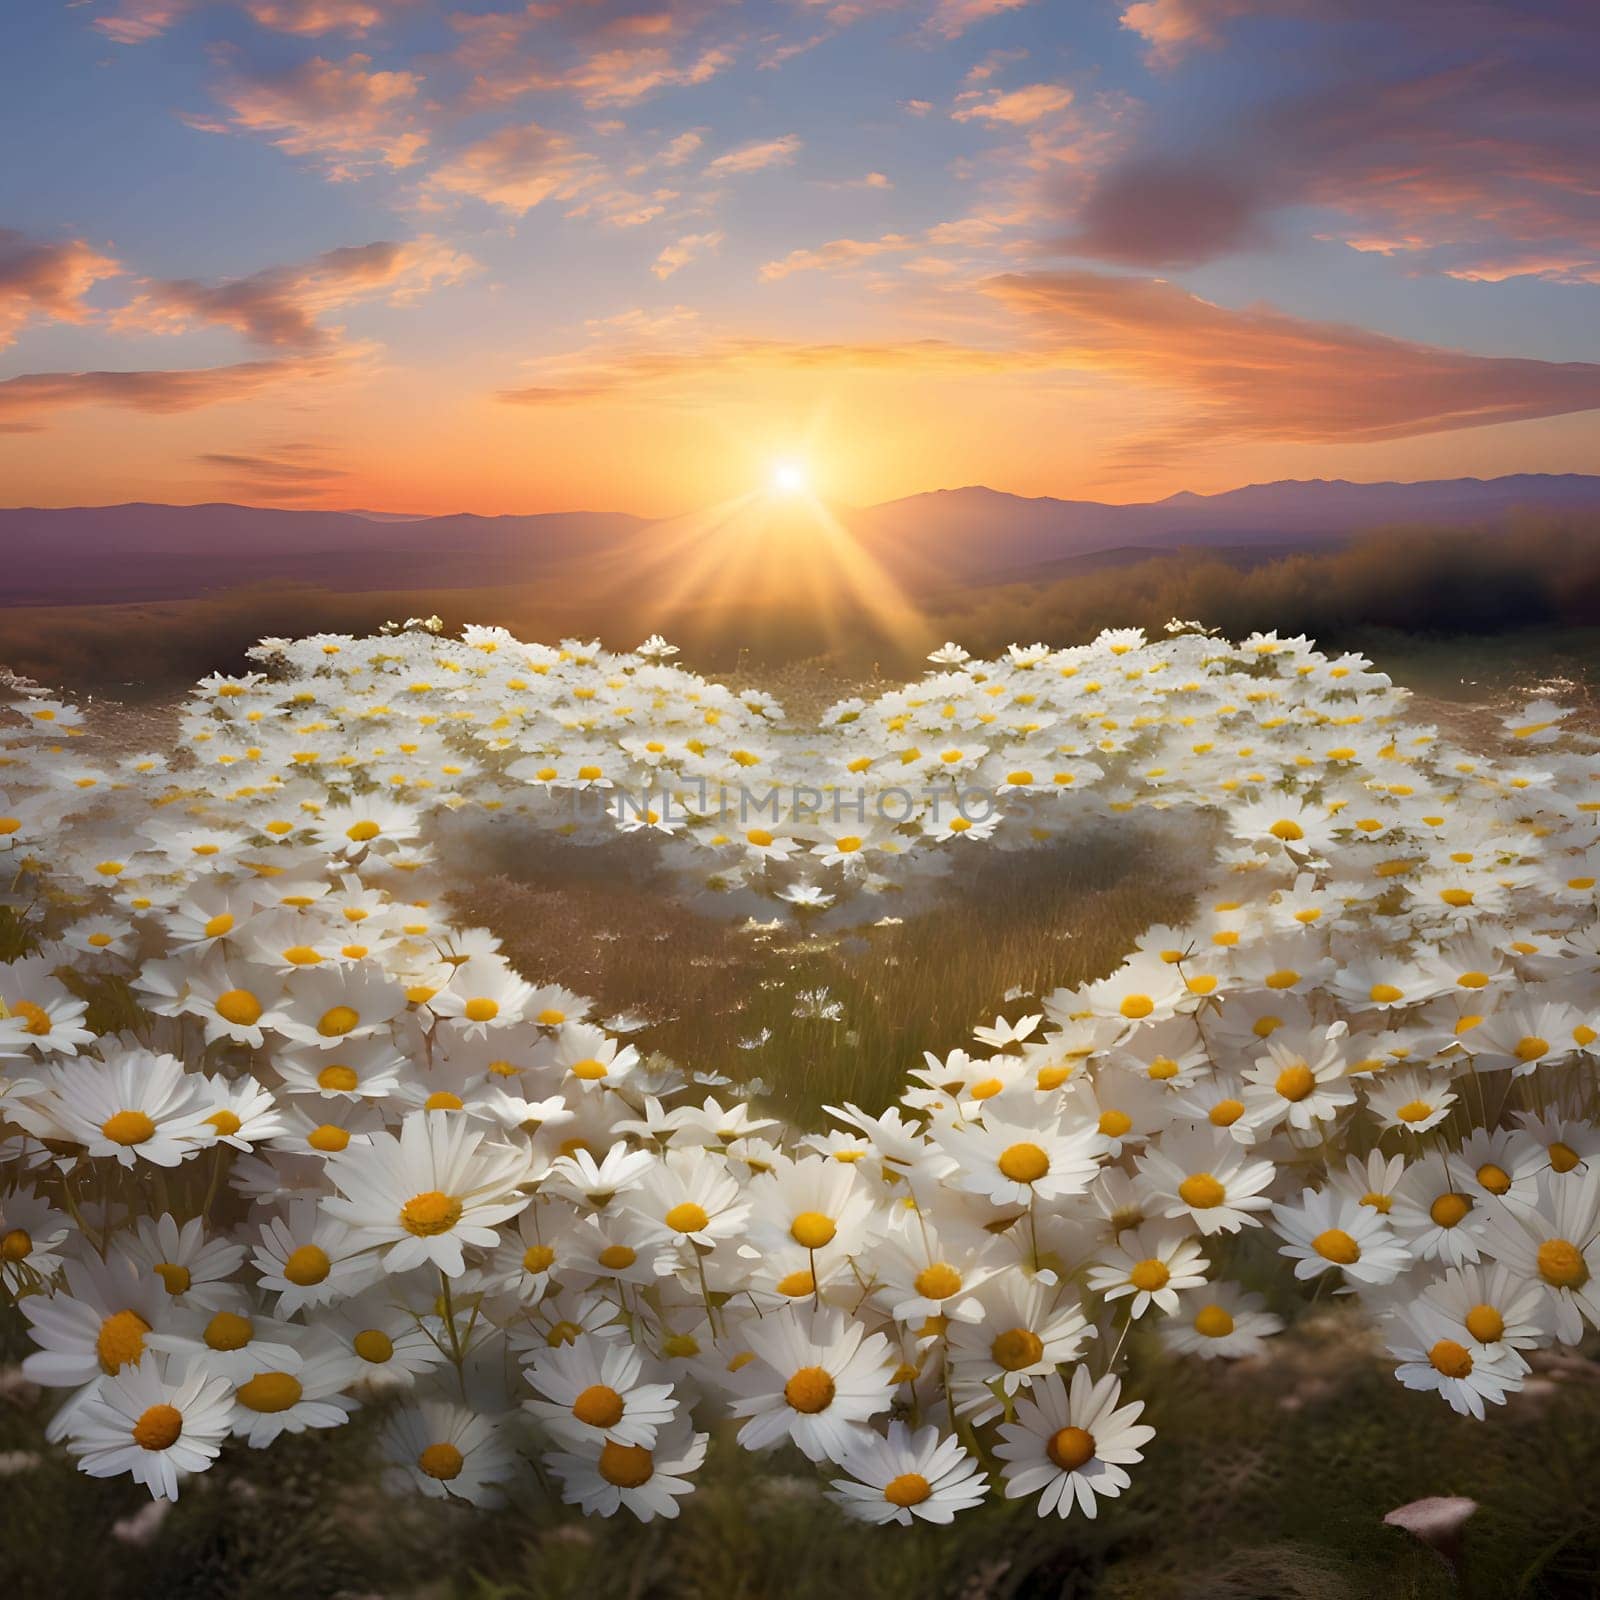 Heart made of white and yellow daisy flowers in a field at sunset. Heart as a symbol of affection and love. The time of falling in love and love.